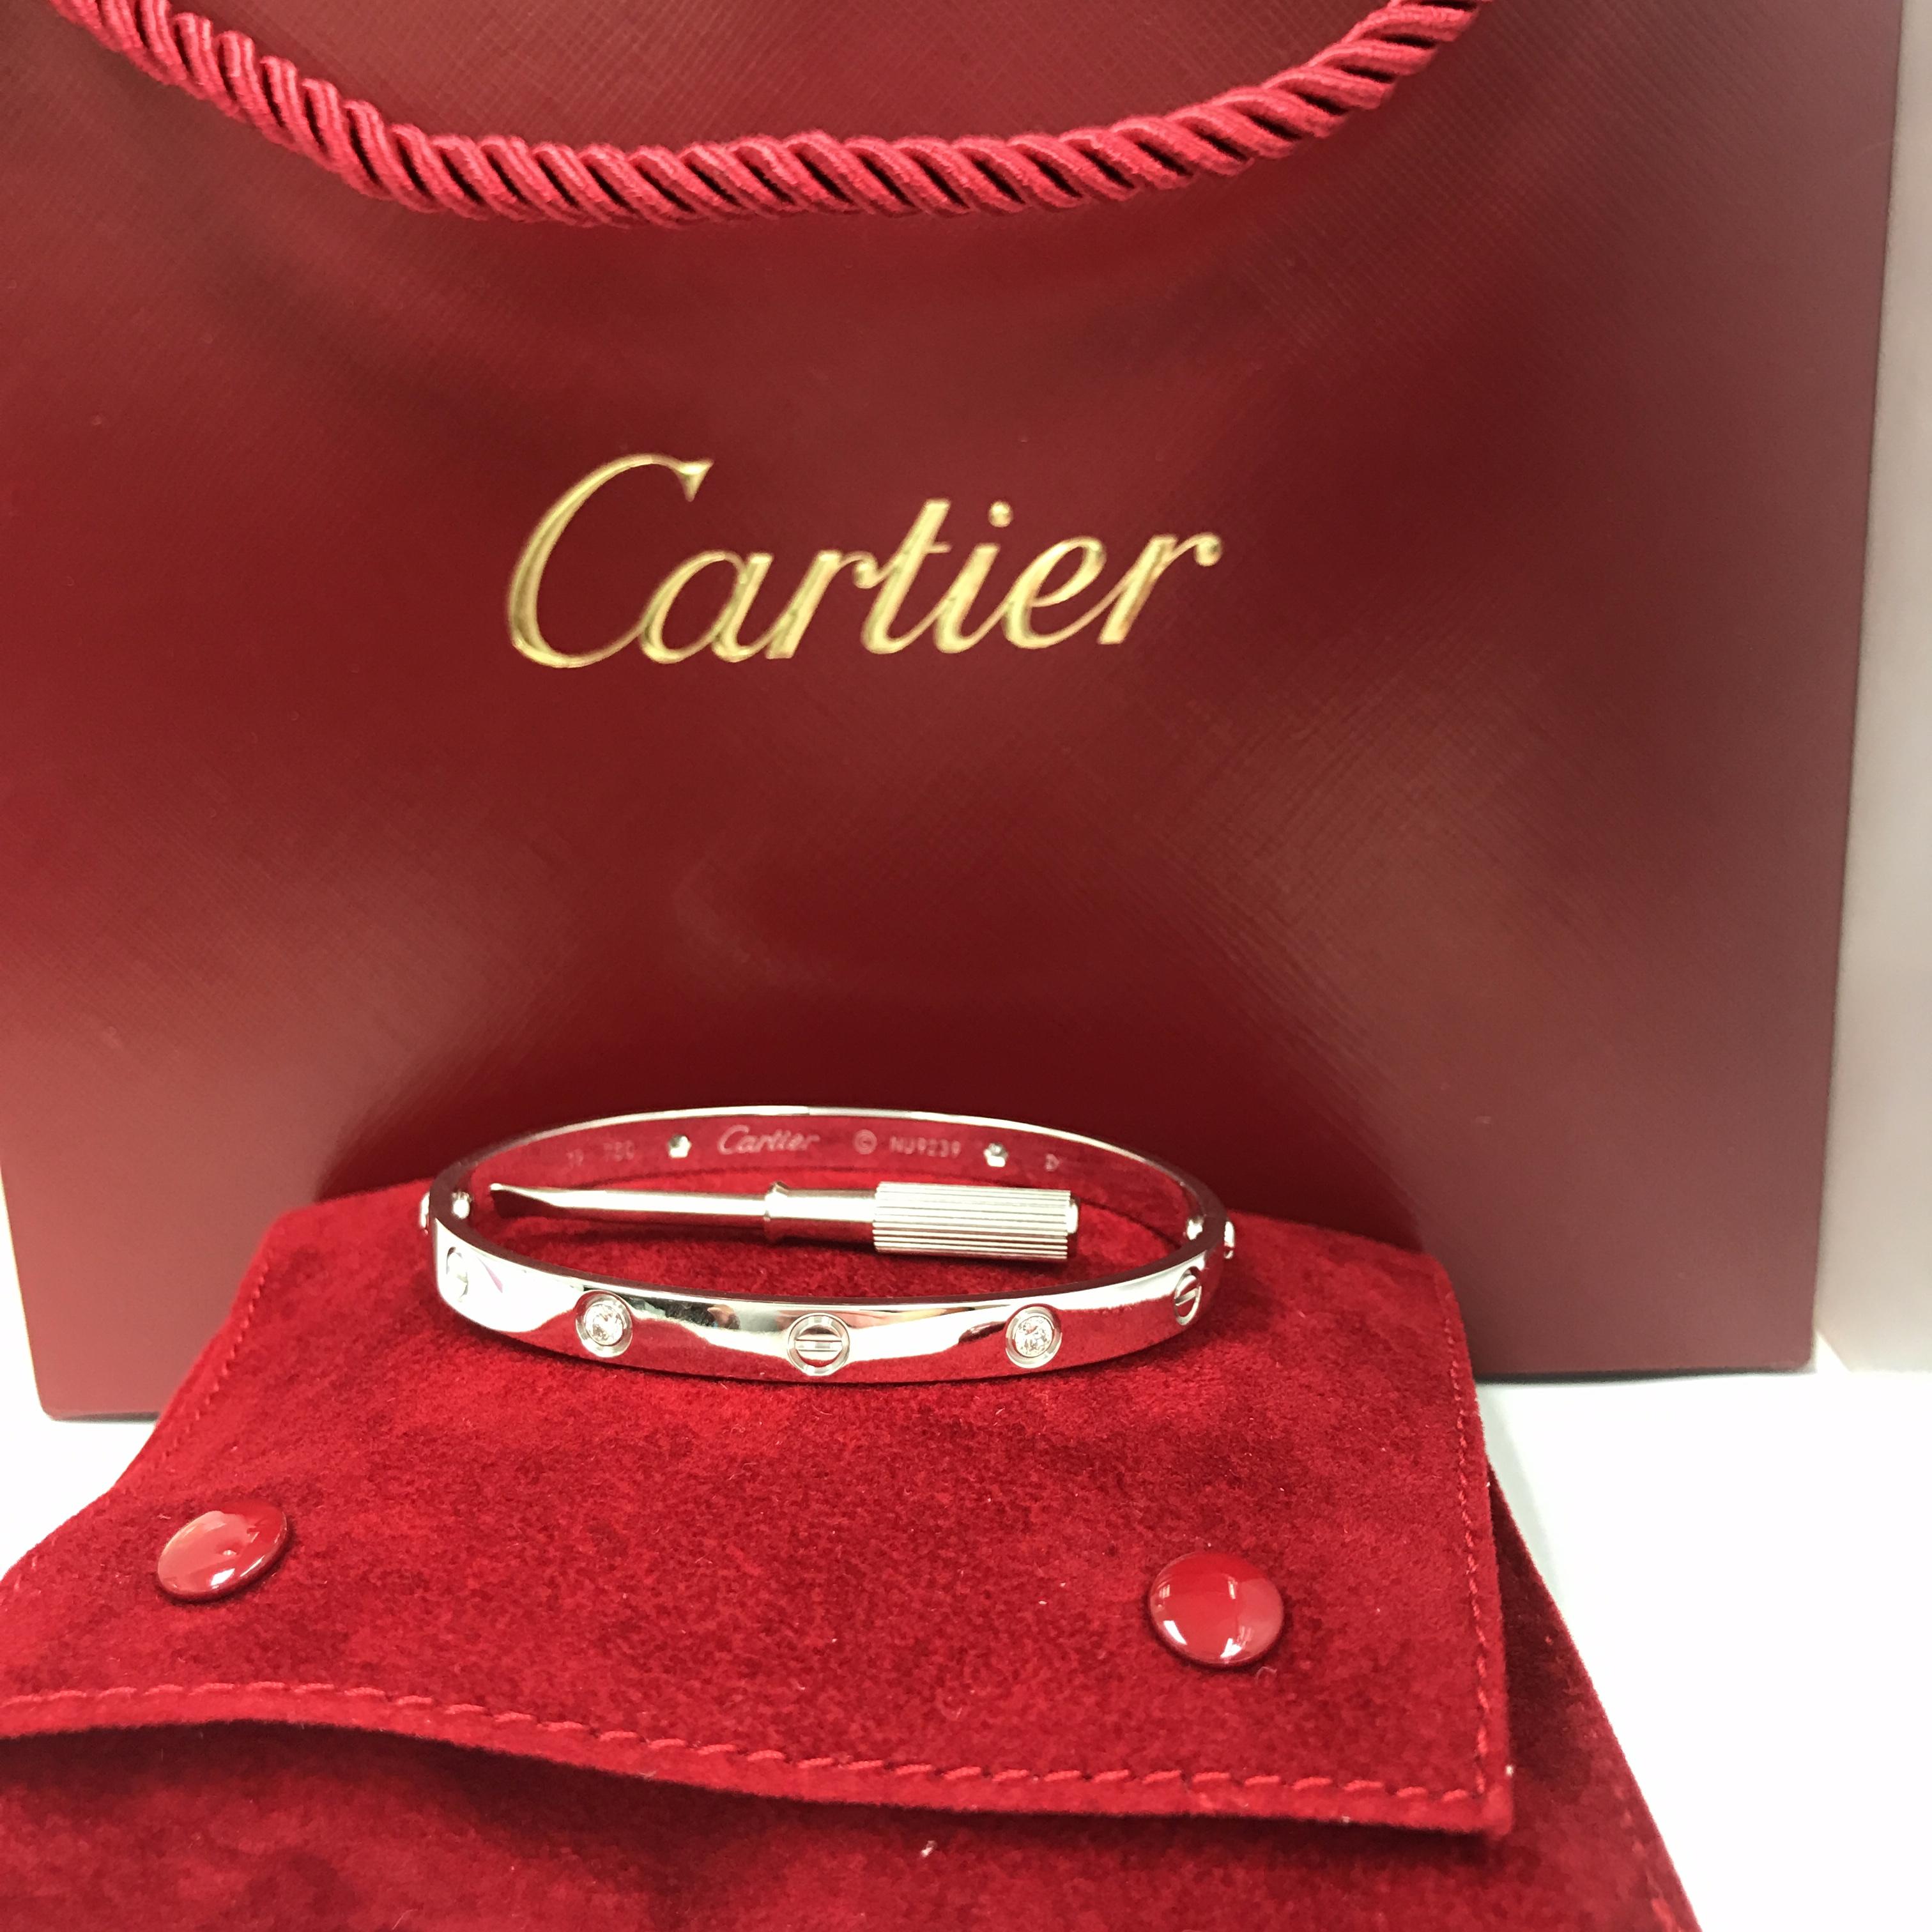 Cartier Love Bracelet in 18K White Gold.  (4) Round Brilliant Cut Diamonds weighing .42 carat total weight, F-G in color, VVS1 are bezel set in this classic Bangle.  Size 19.  35.45 grams.  Cartier Box, Gold Screwdriver and Cartier Certificate